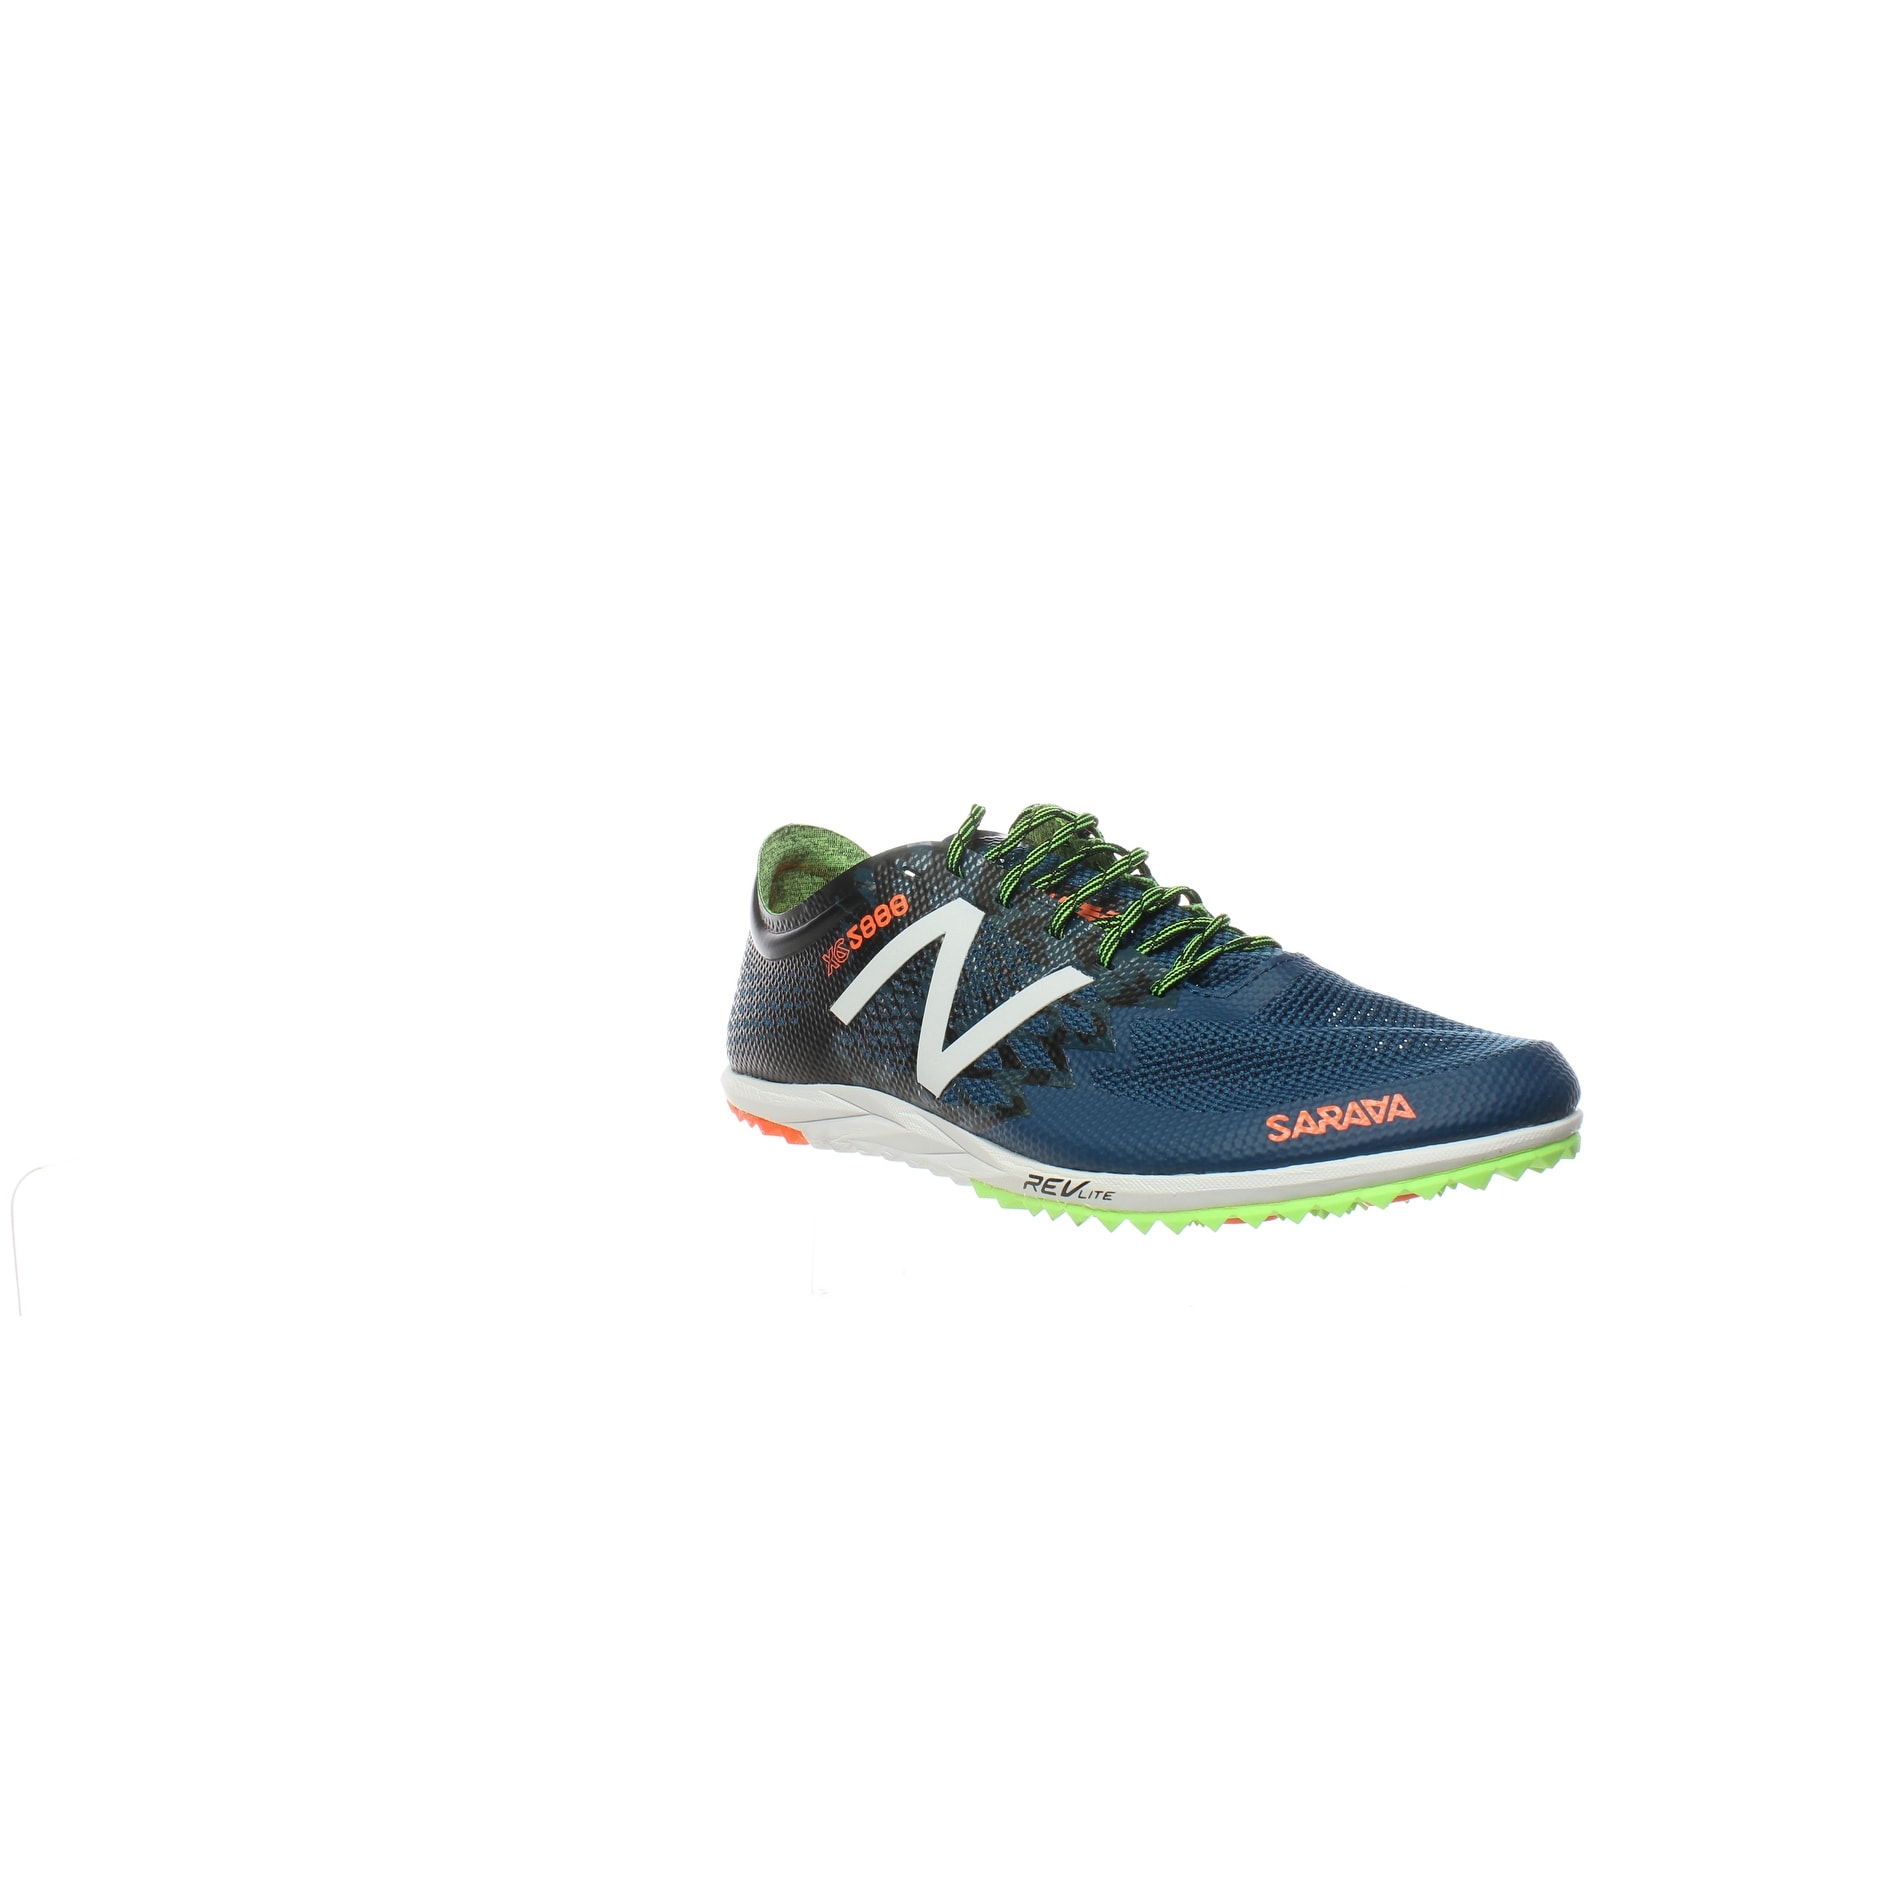 new balance men's sneakers size 7